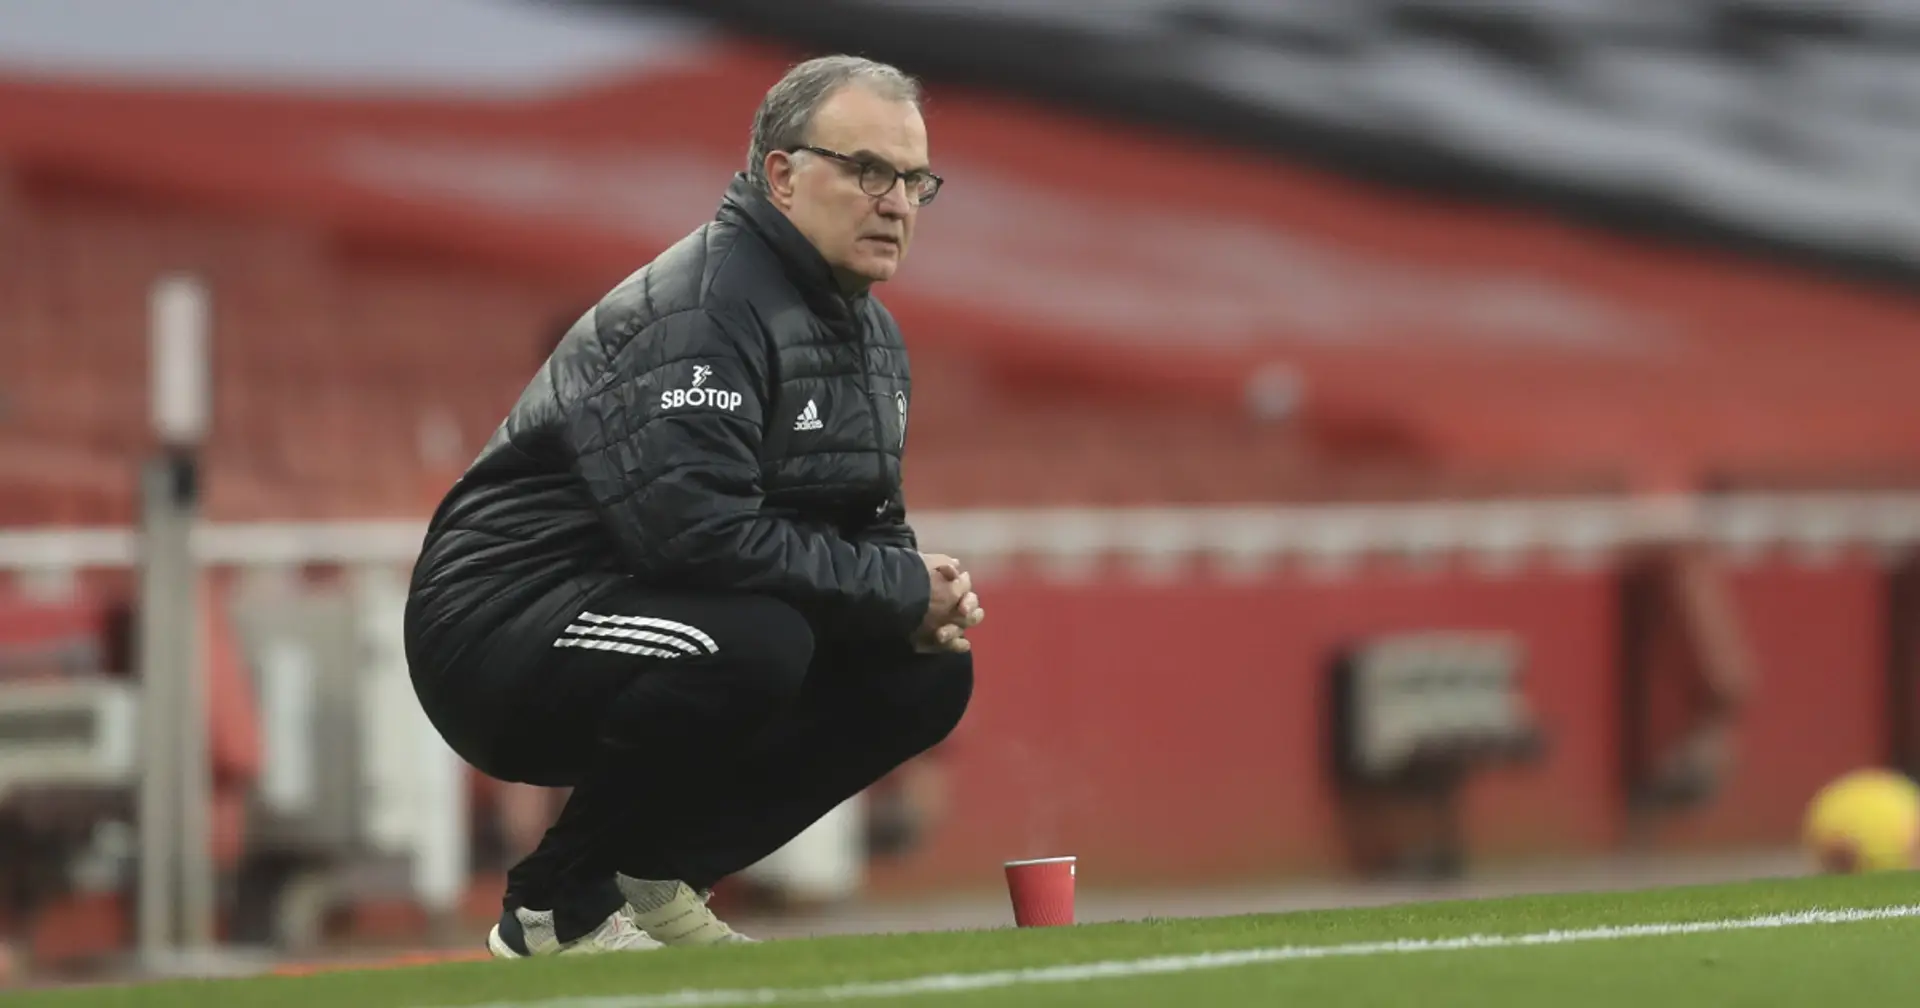 Marcelo Bielsa names key area where Leeds lost the game being unable to 'neutralize' Arsenal players there